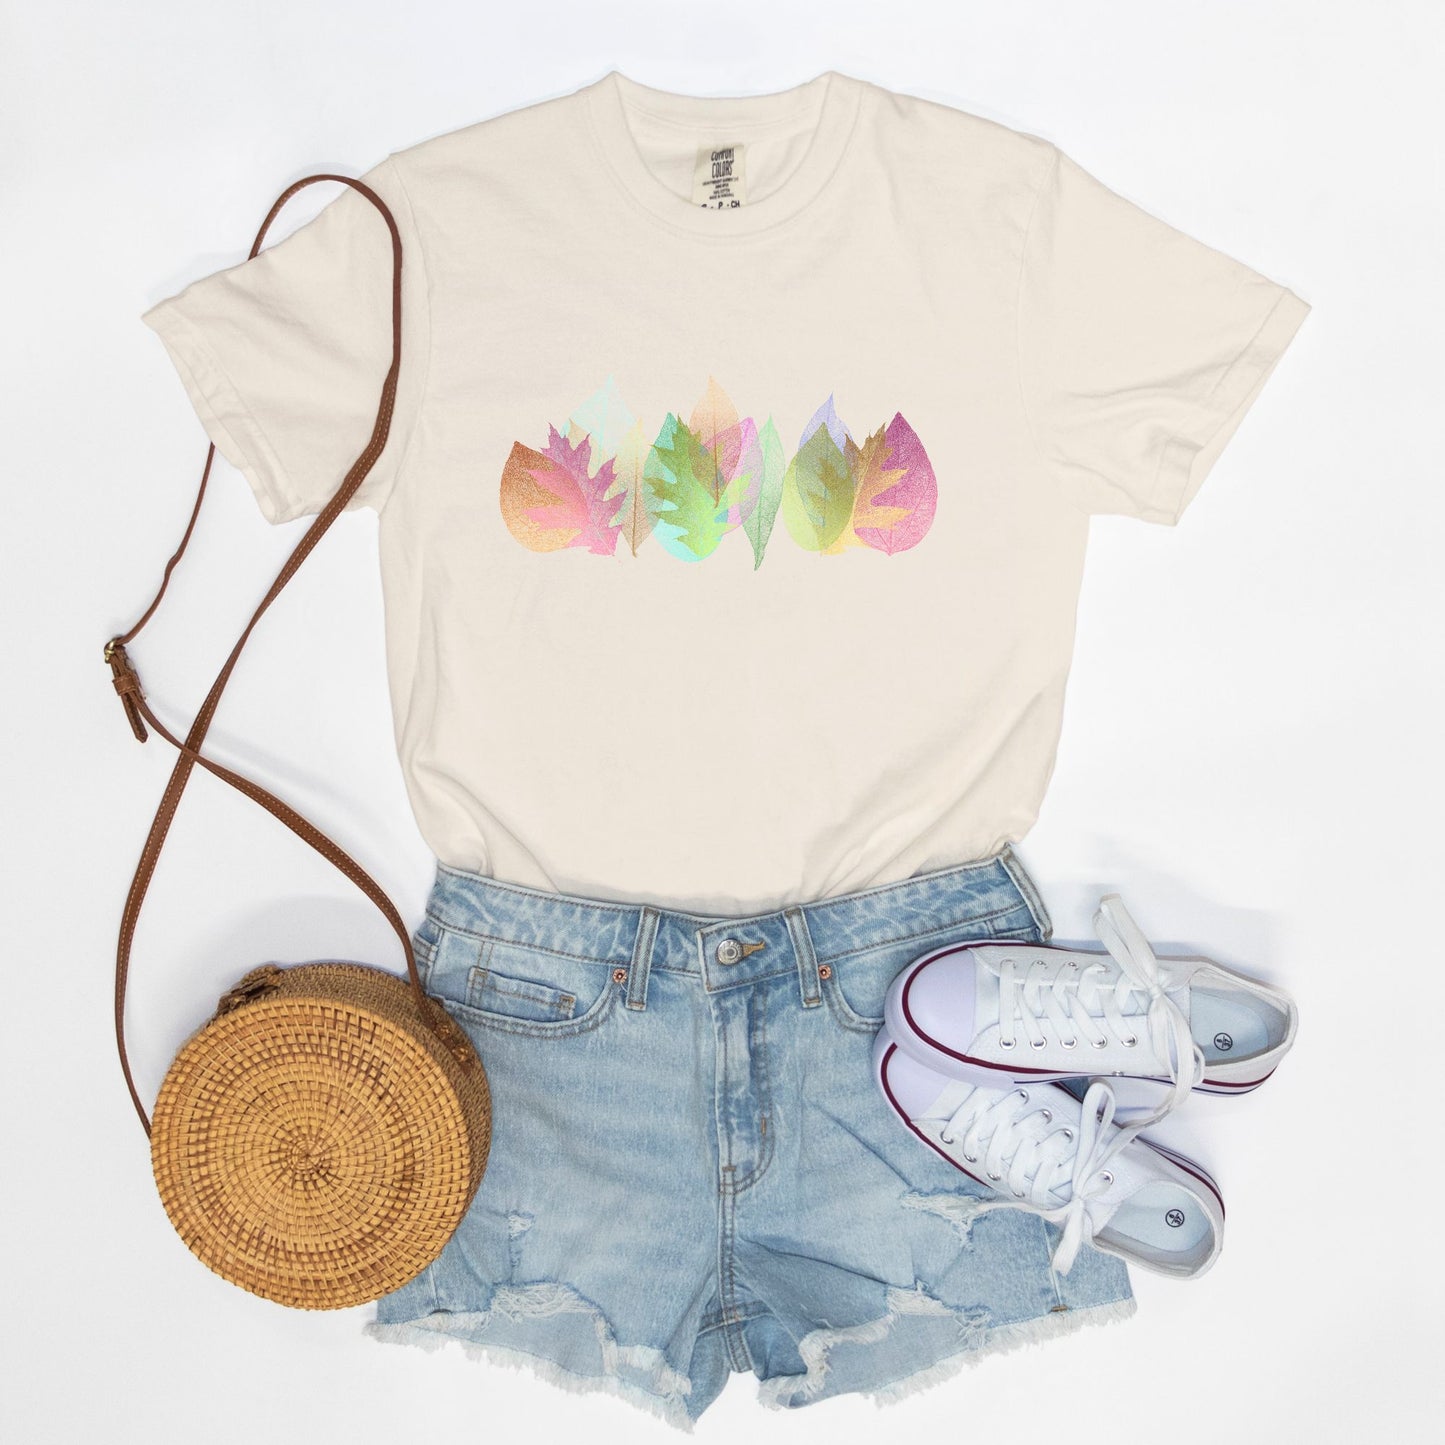 Happy Leaves Tee Shirt by Sorcery Soap + Hocus Pocus Craft